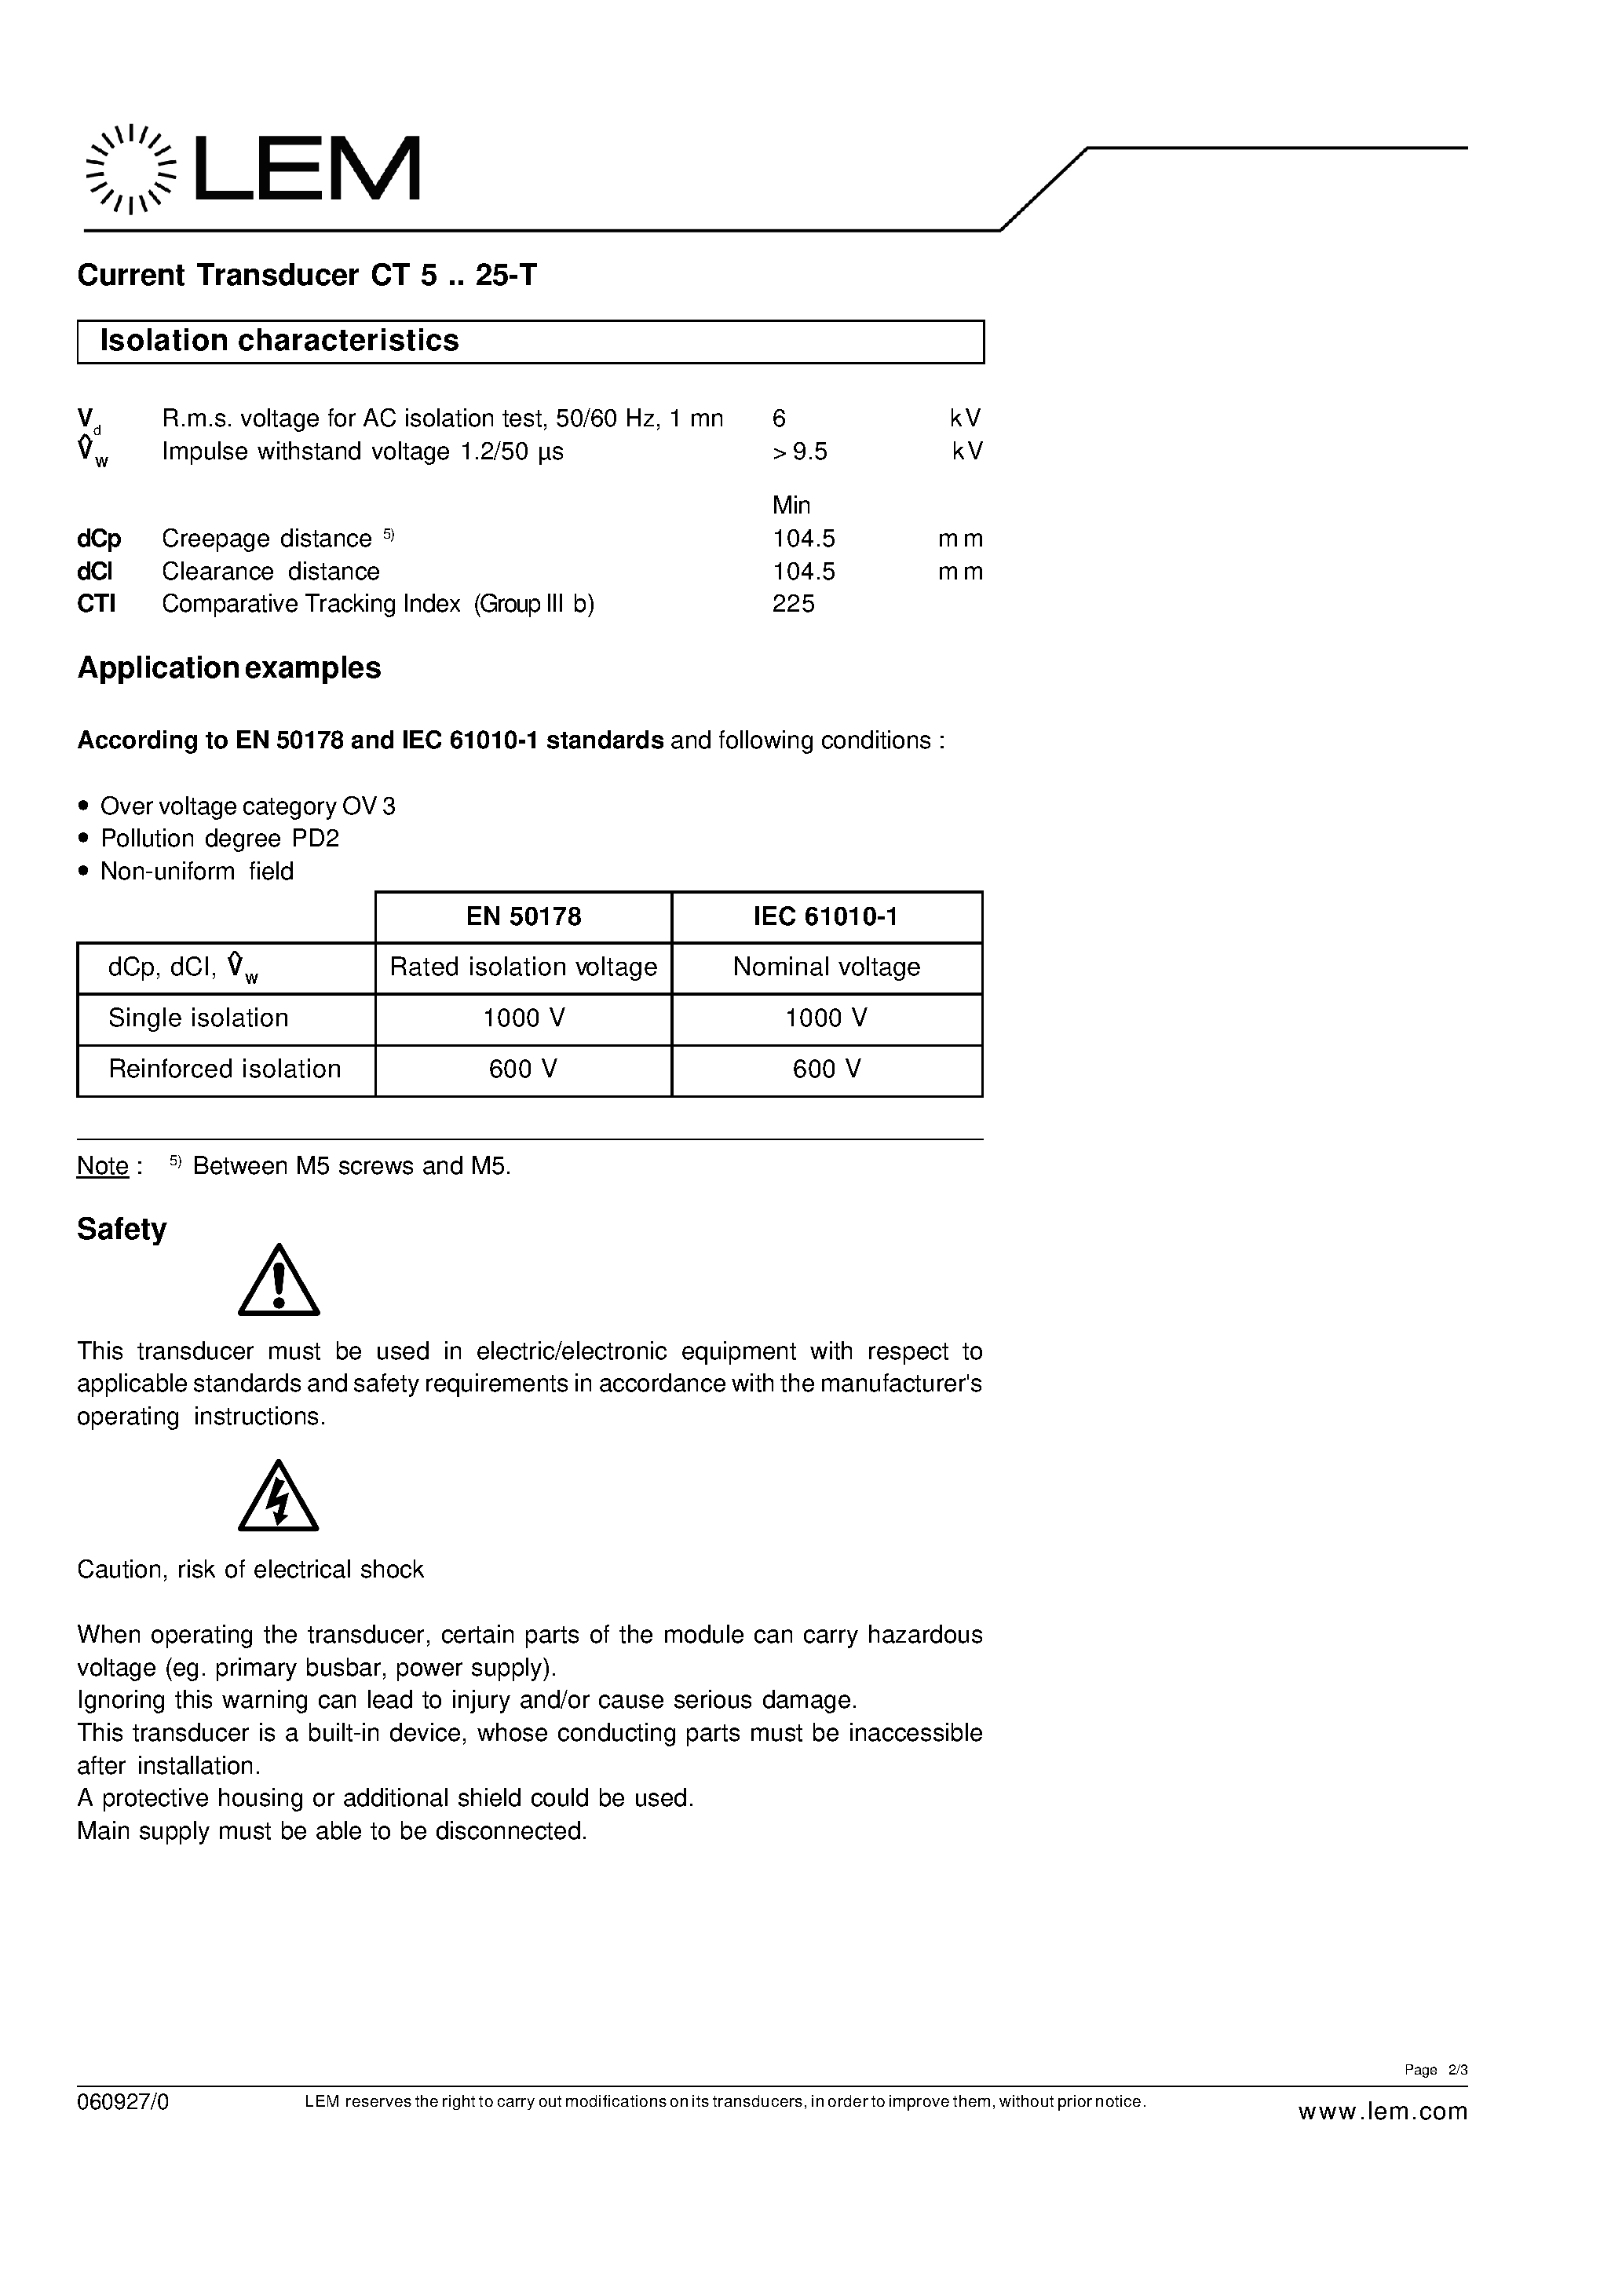 Datasheet CT25-T - Current Transducer page 2